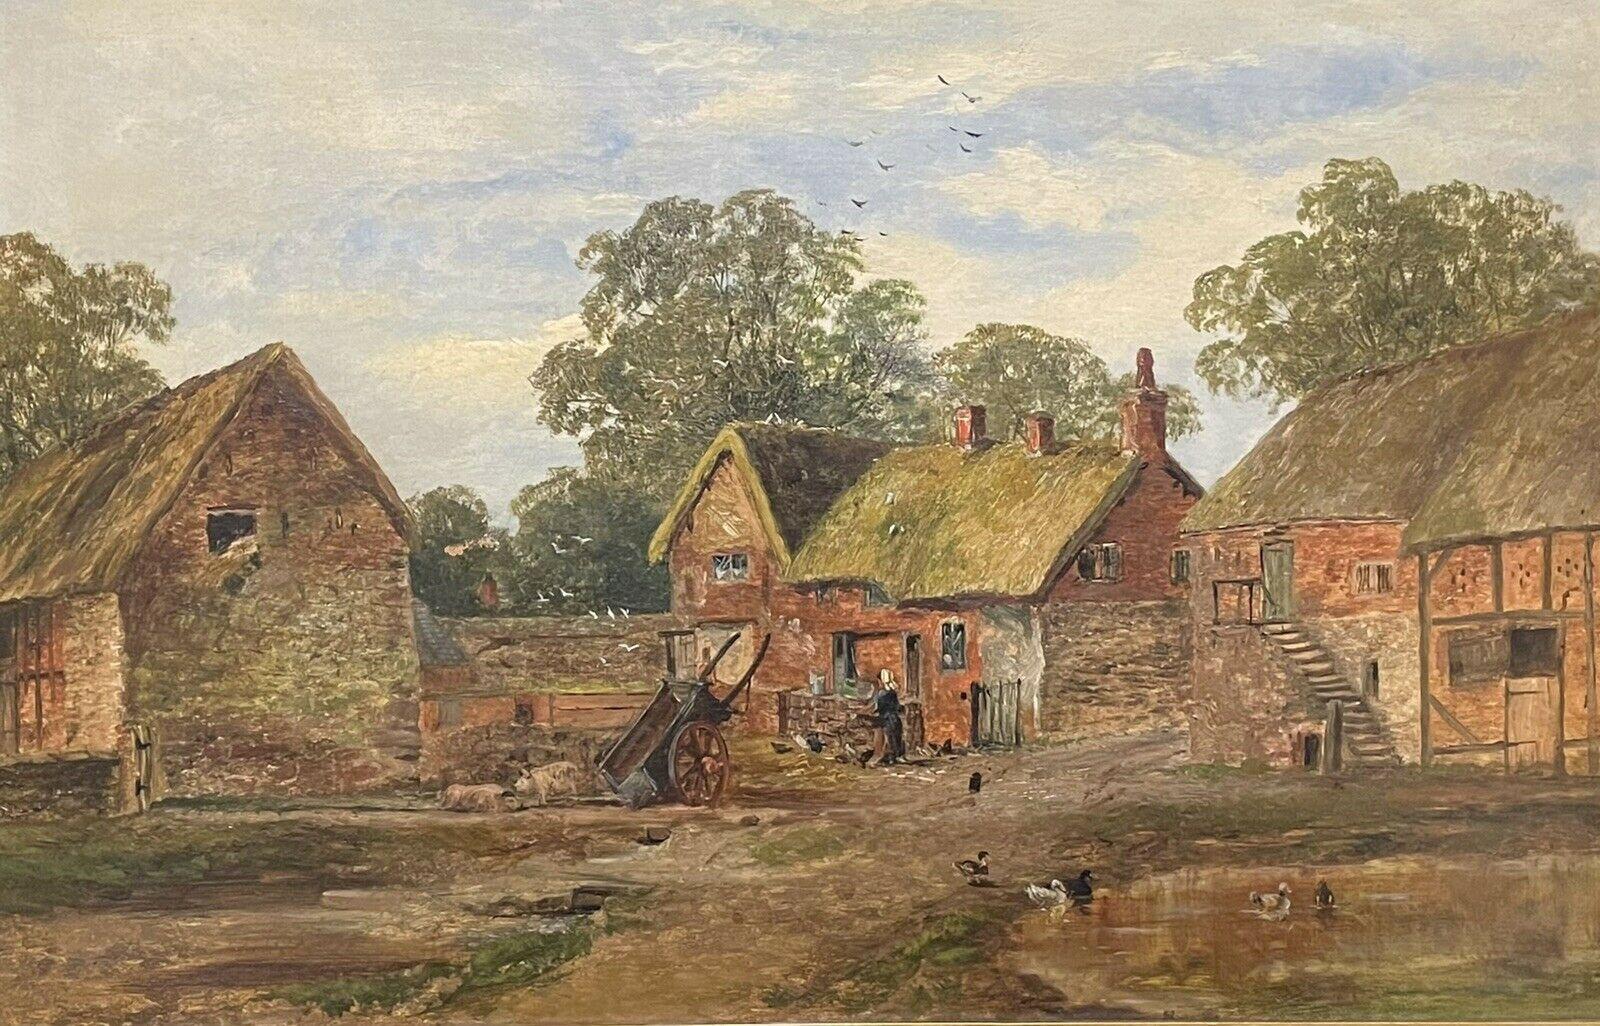 SIGNED VICTORIAN ENGLISH OIL PAINTING - FARMYARD SCENE OLD BUILDINGS -DATED 1875